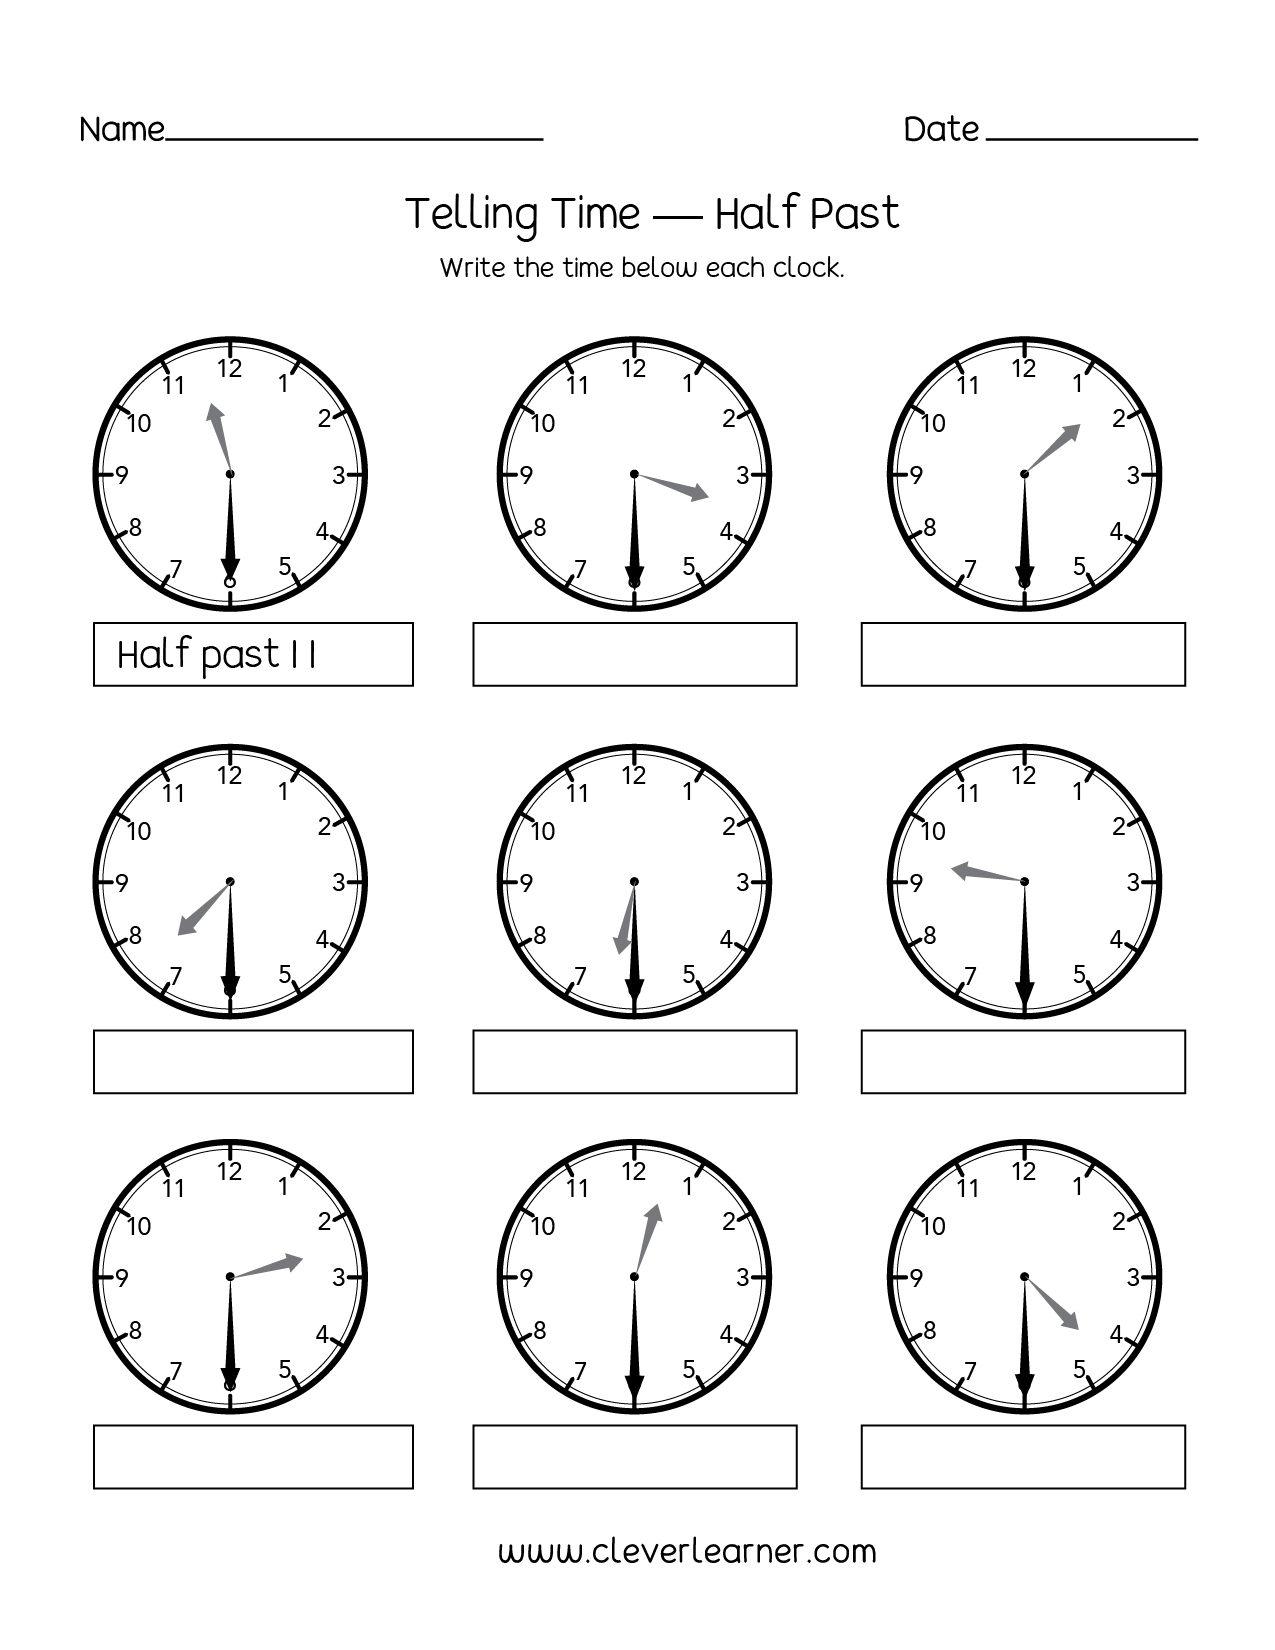 Telling Time Half Past The Hour Worksheets For 1St And 2Nd Graders - Free Printable Telling Time Worksheets For 1St Grade